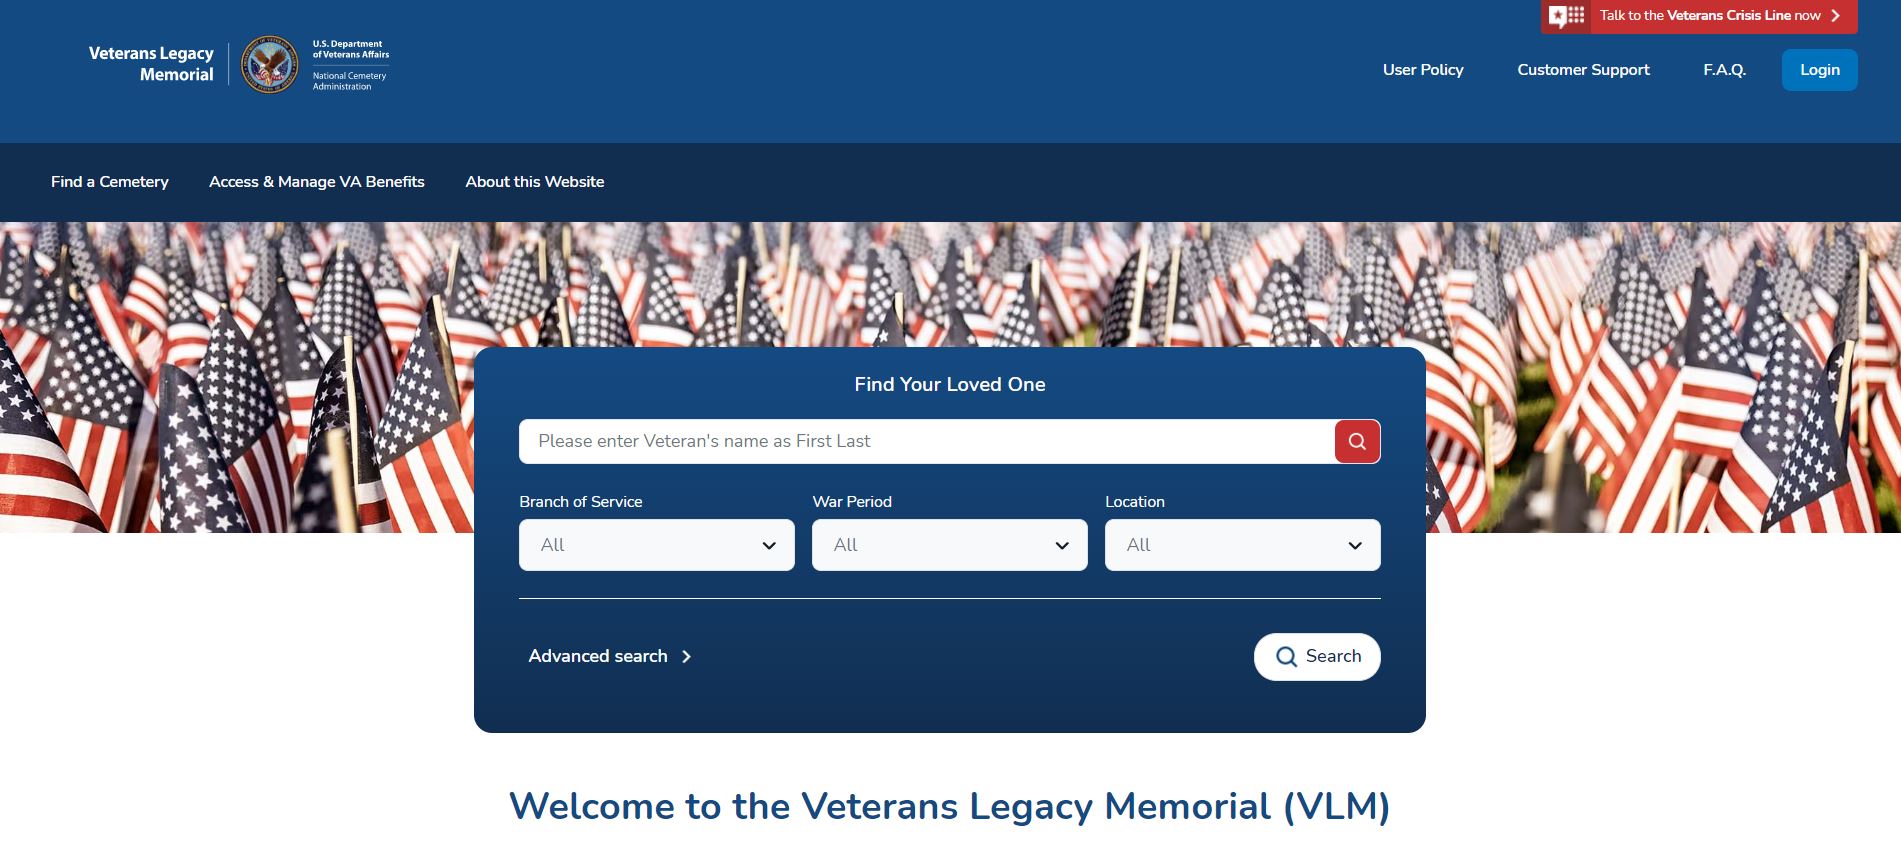 VLM honors those who served